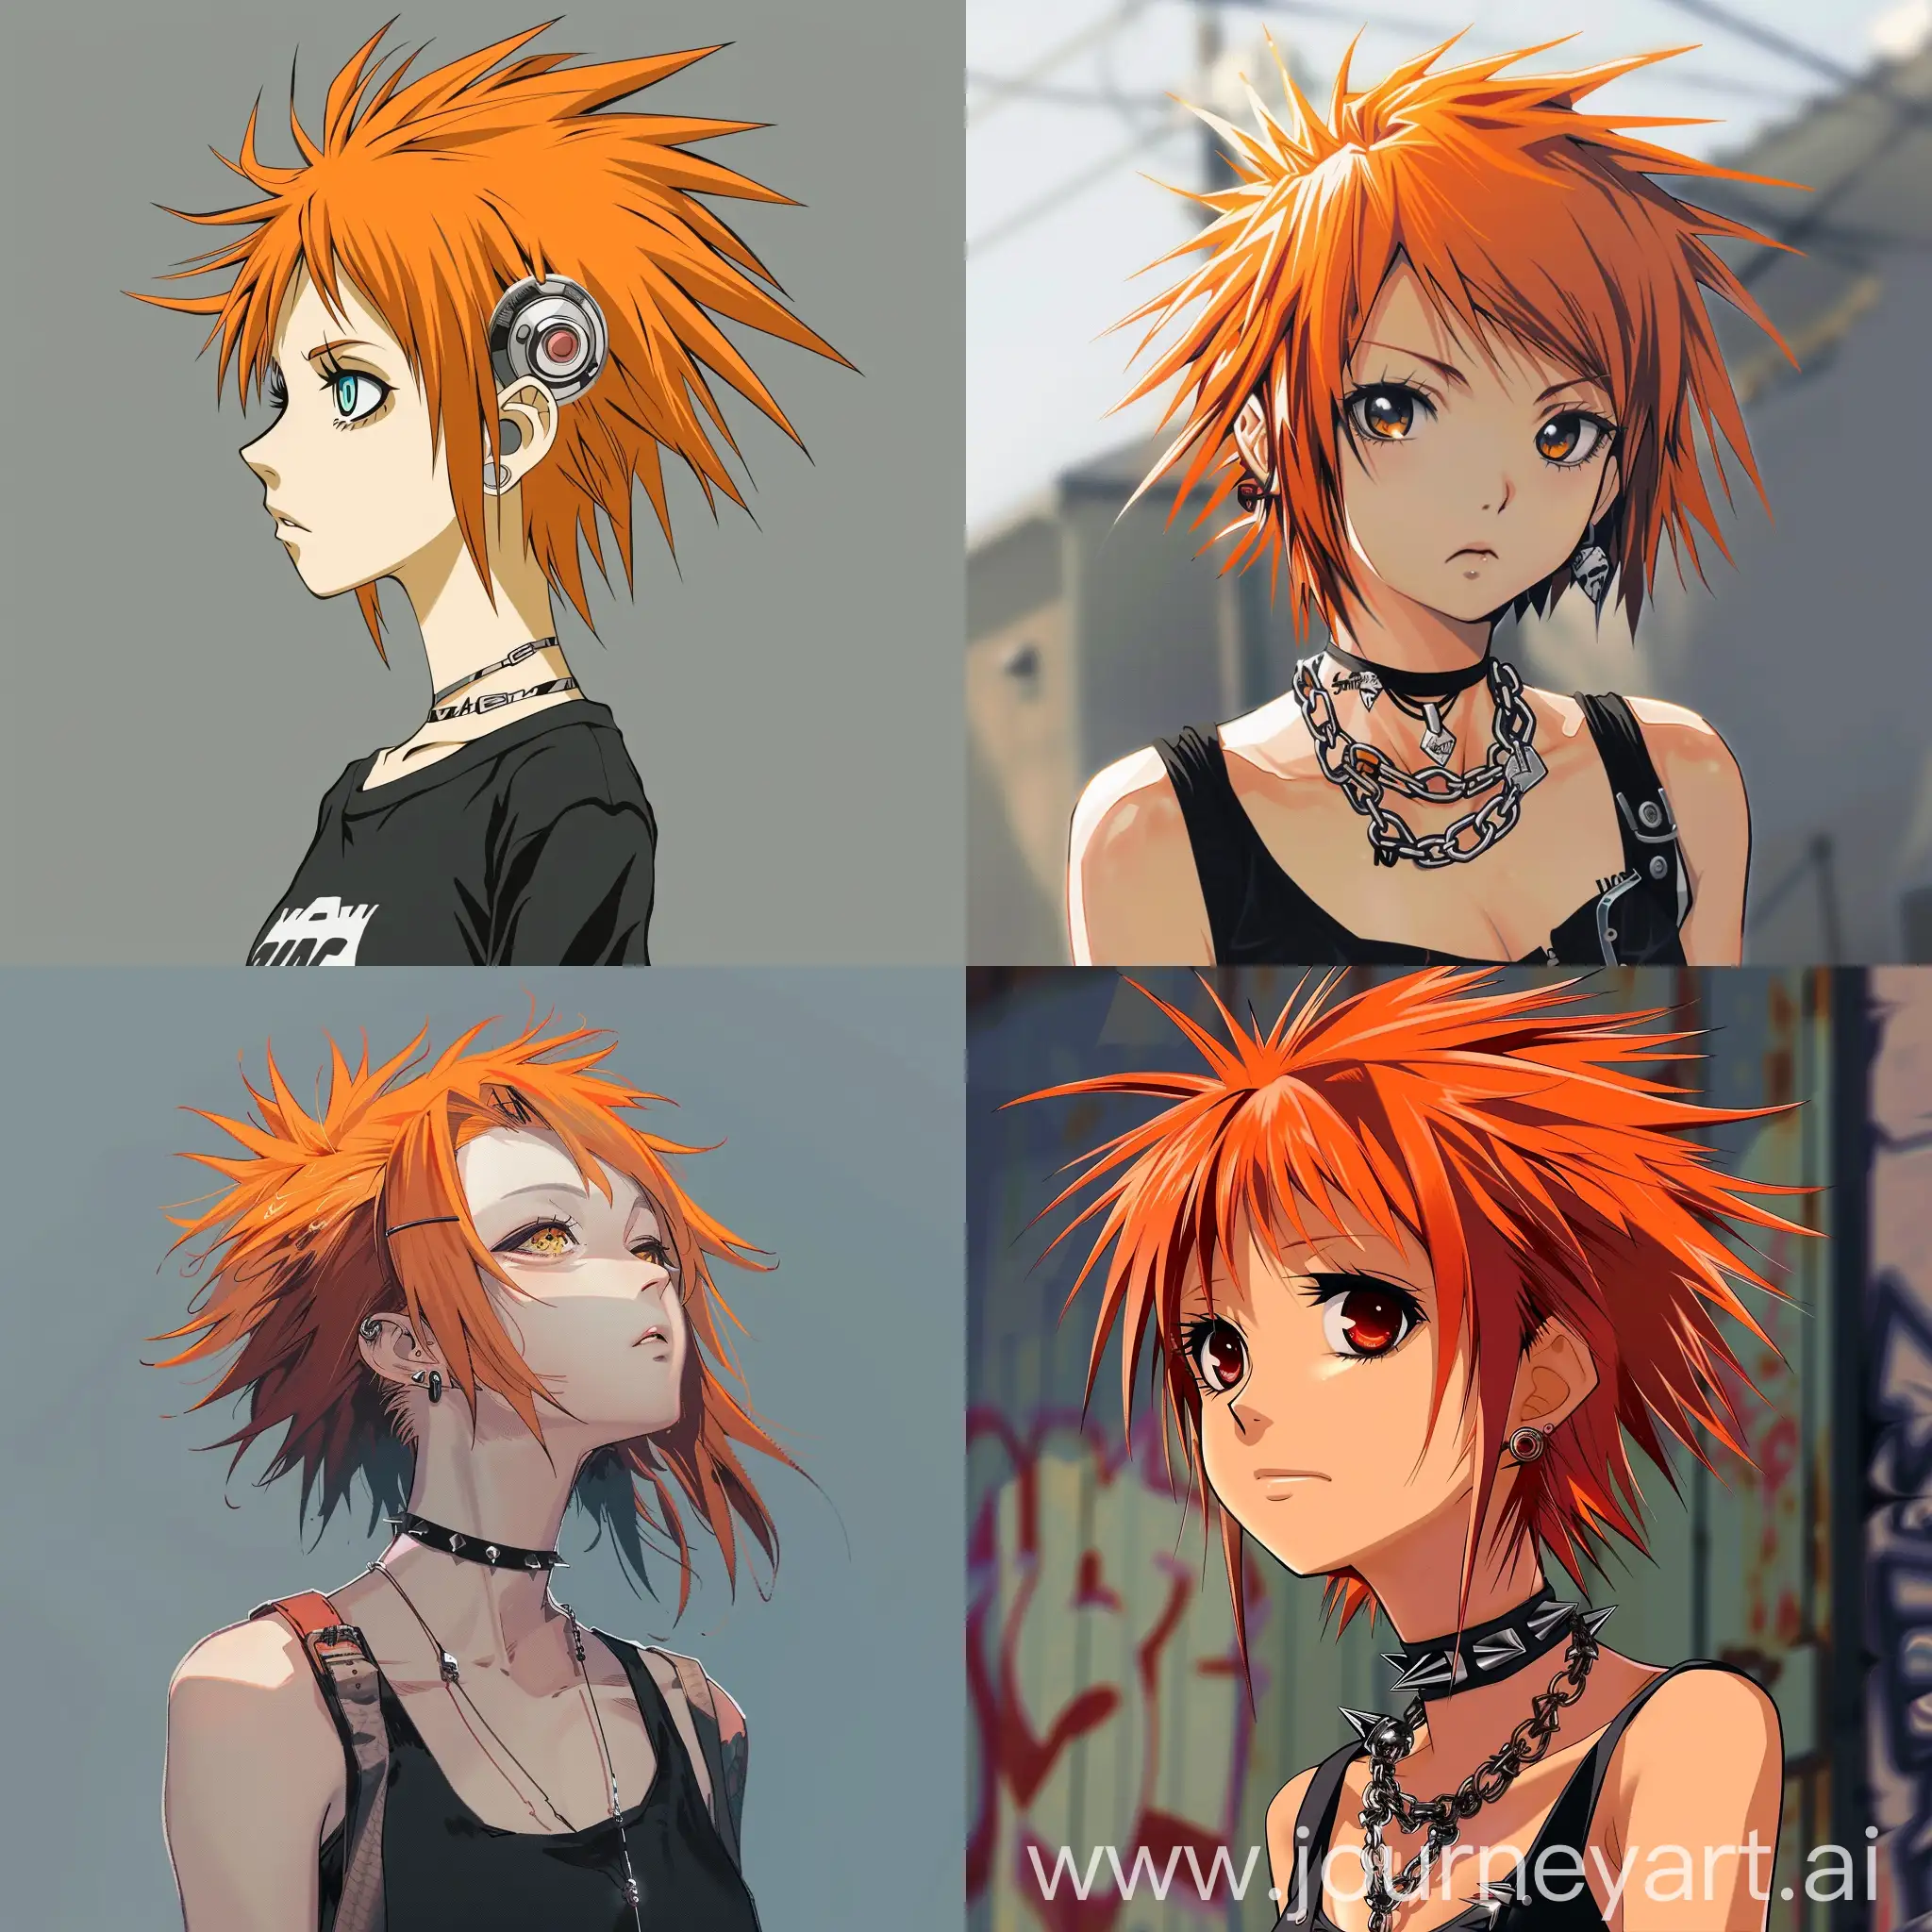 Anime female, young, orange spiked hair, tomboy